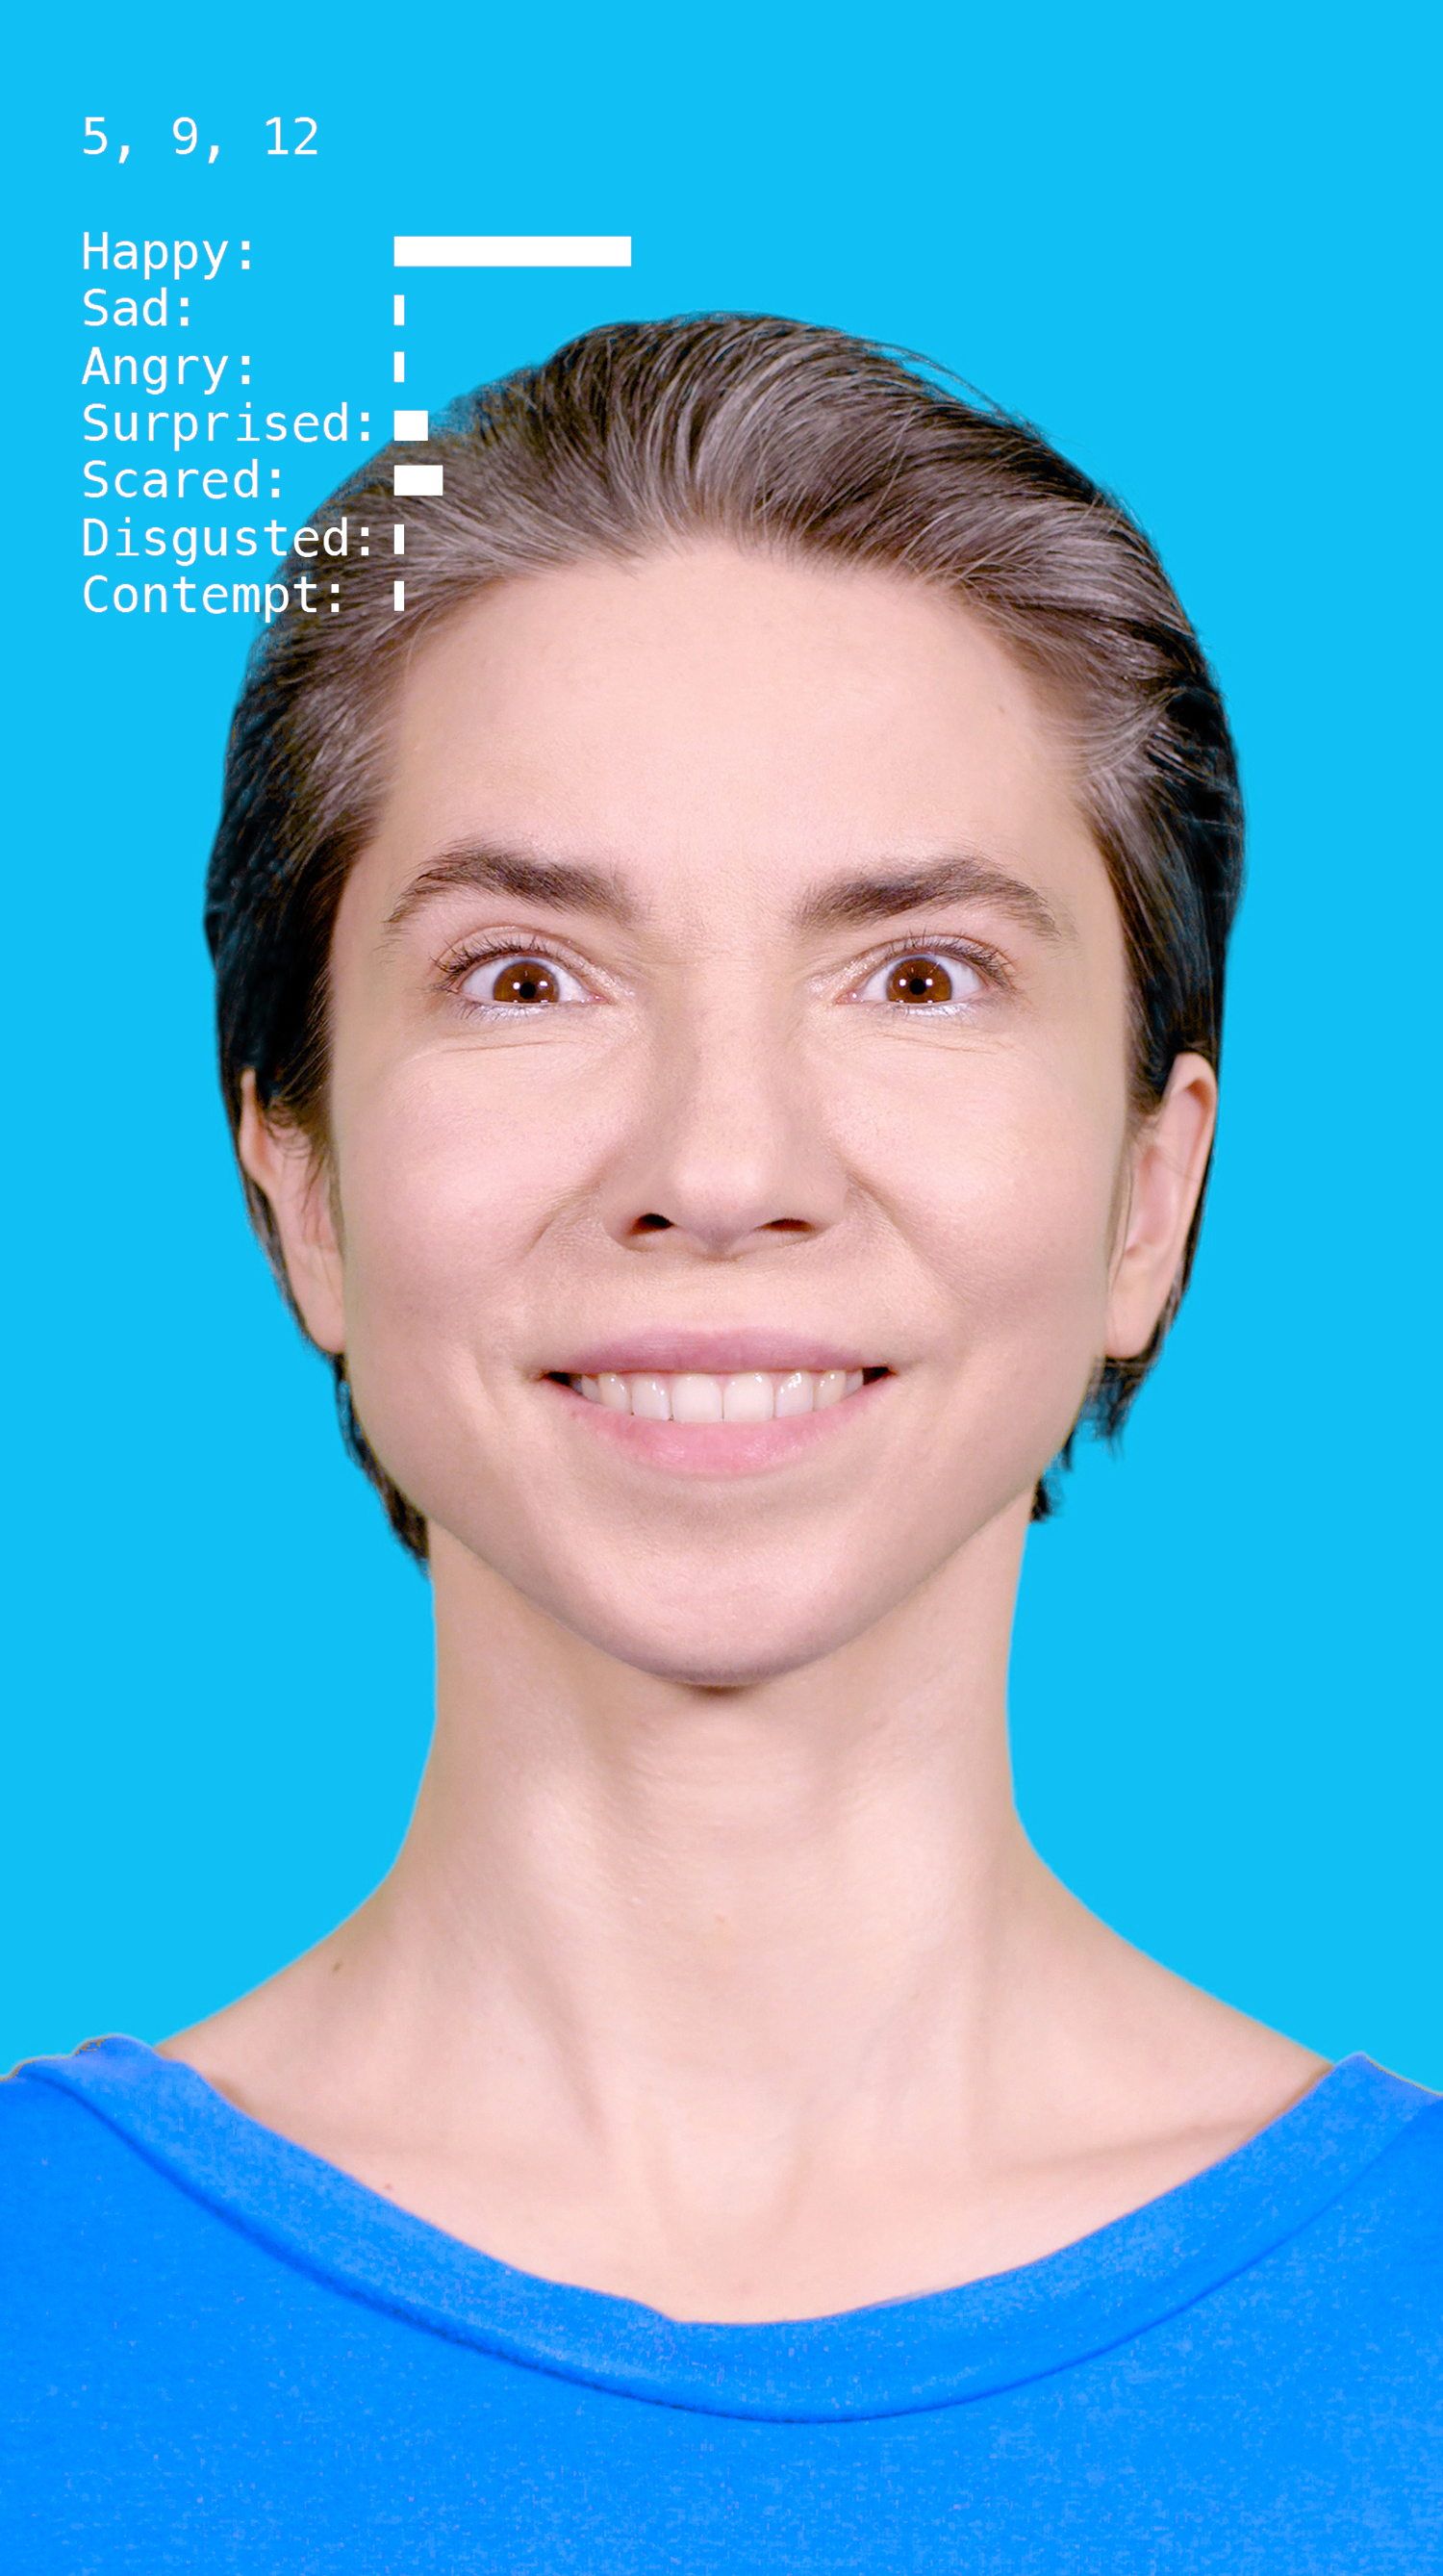 The screenshot shows a woman laughing frontally into the camera.